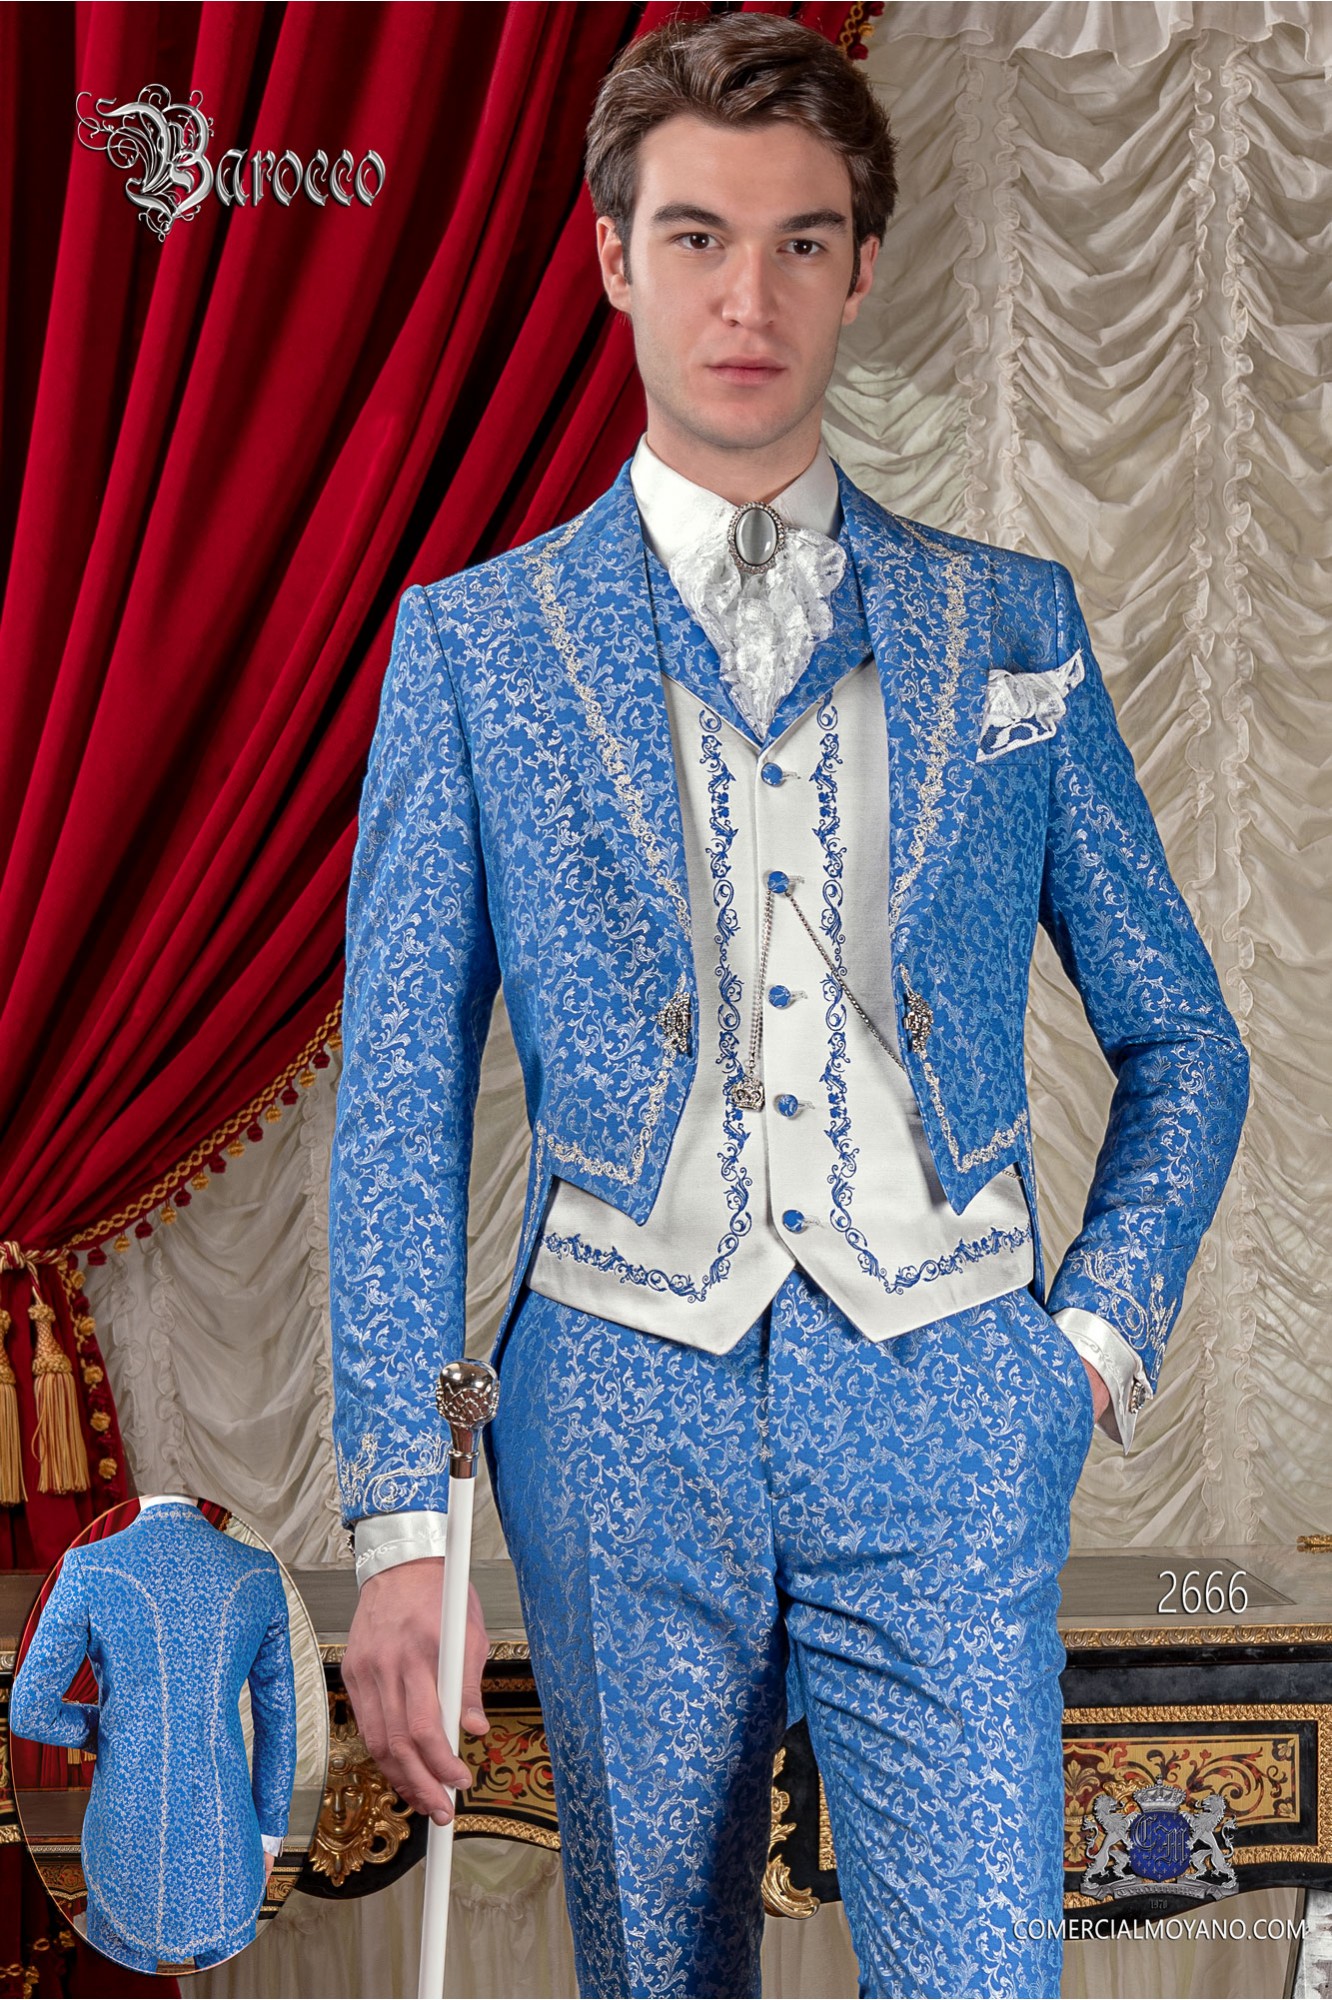 Baroque blue and silver jacquard fabric tail coat with silver embroidery model  2666 Mario Moyano